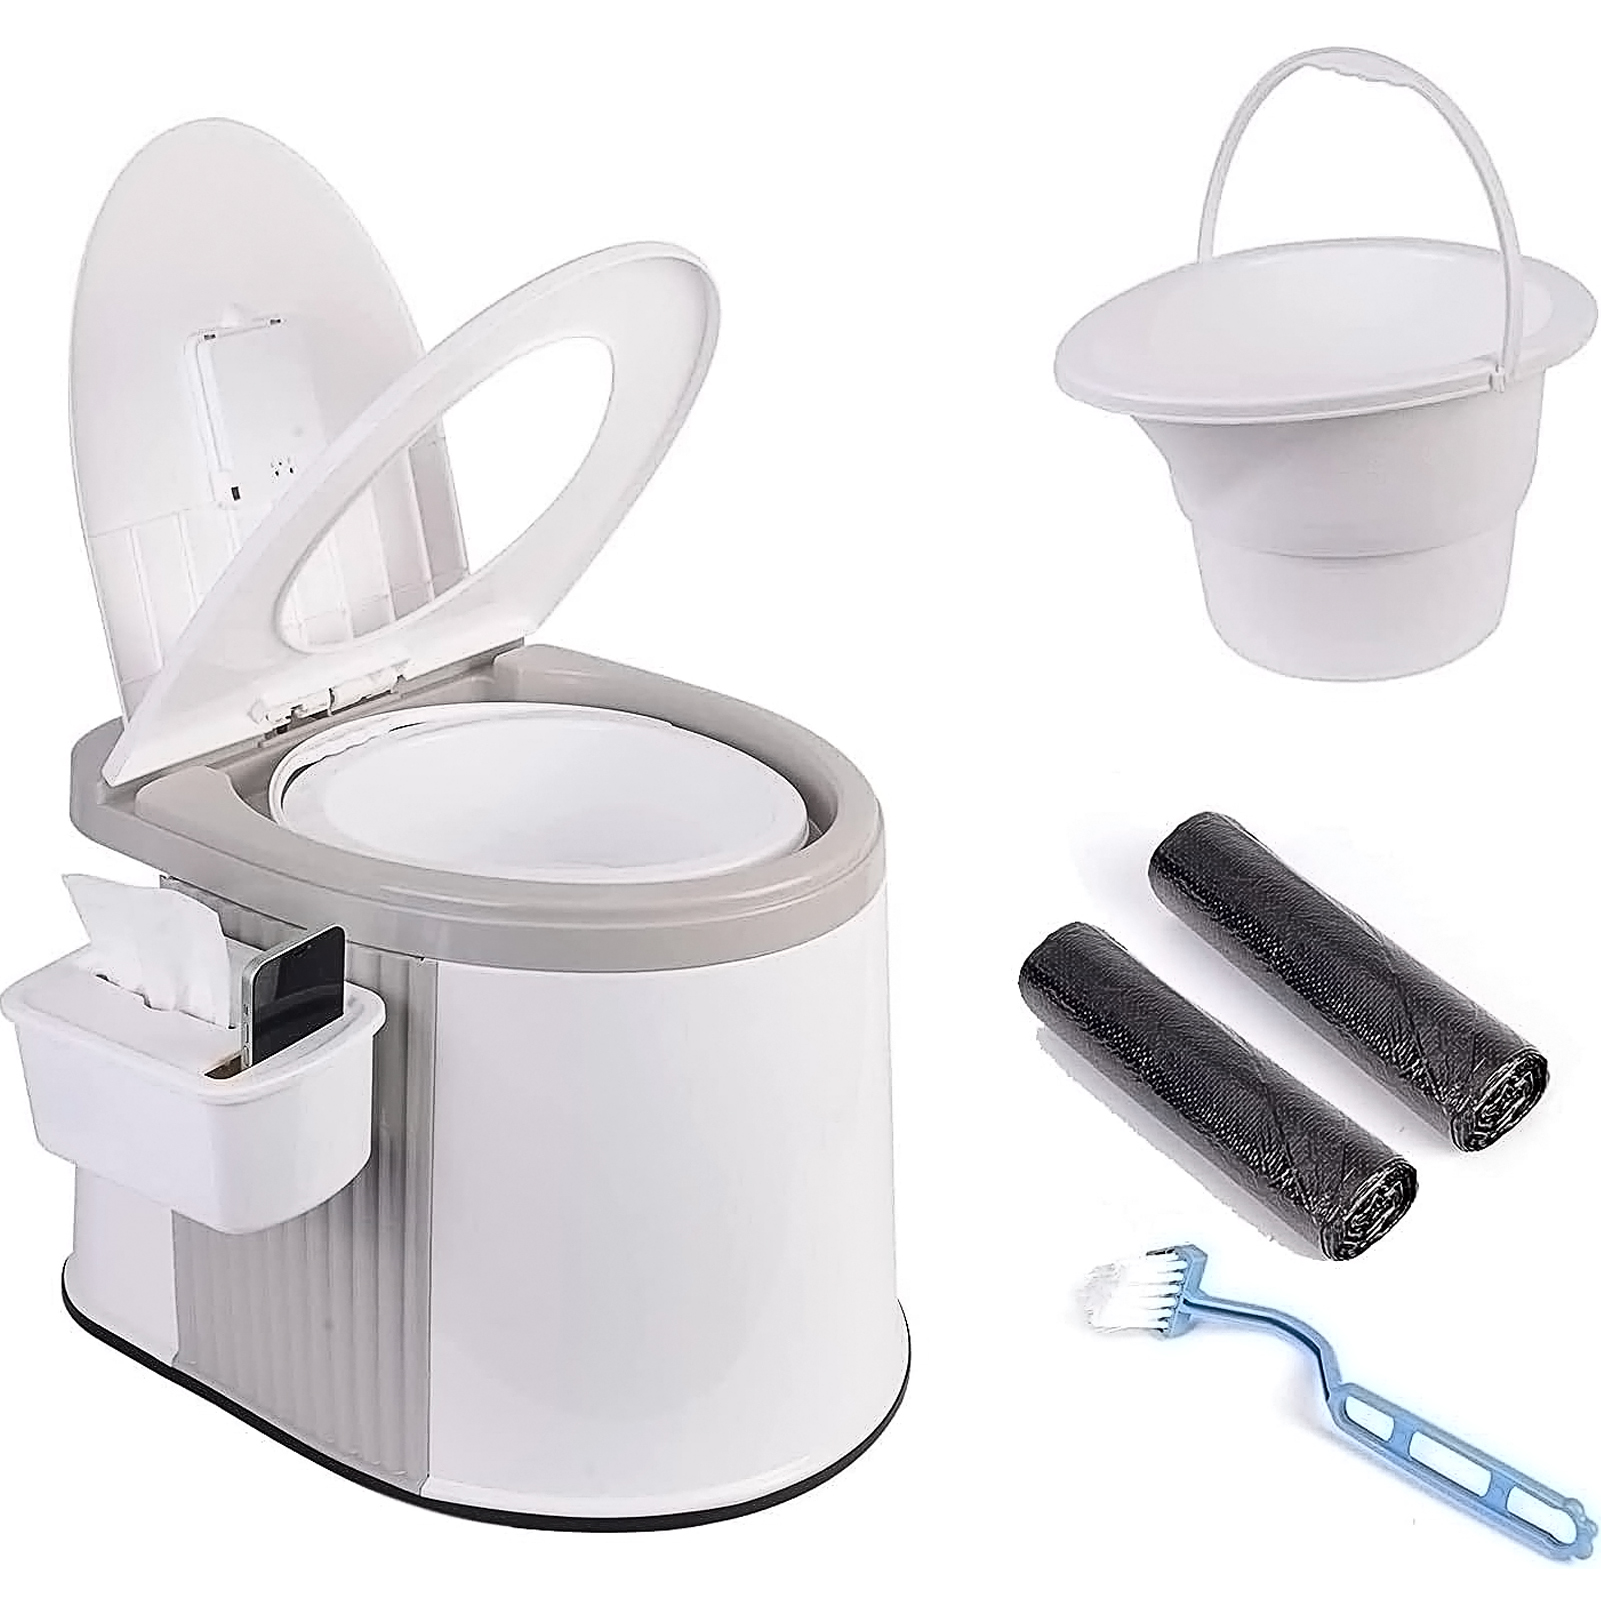 

Portable Toilet For Adults, Extra Large Portable Travel Toilet, Camping Tall Toilets With Lid For Adults And Kids Potty For Car,hiking,beach And Camping